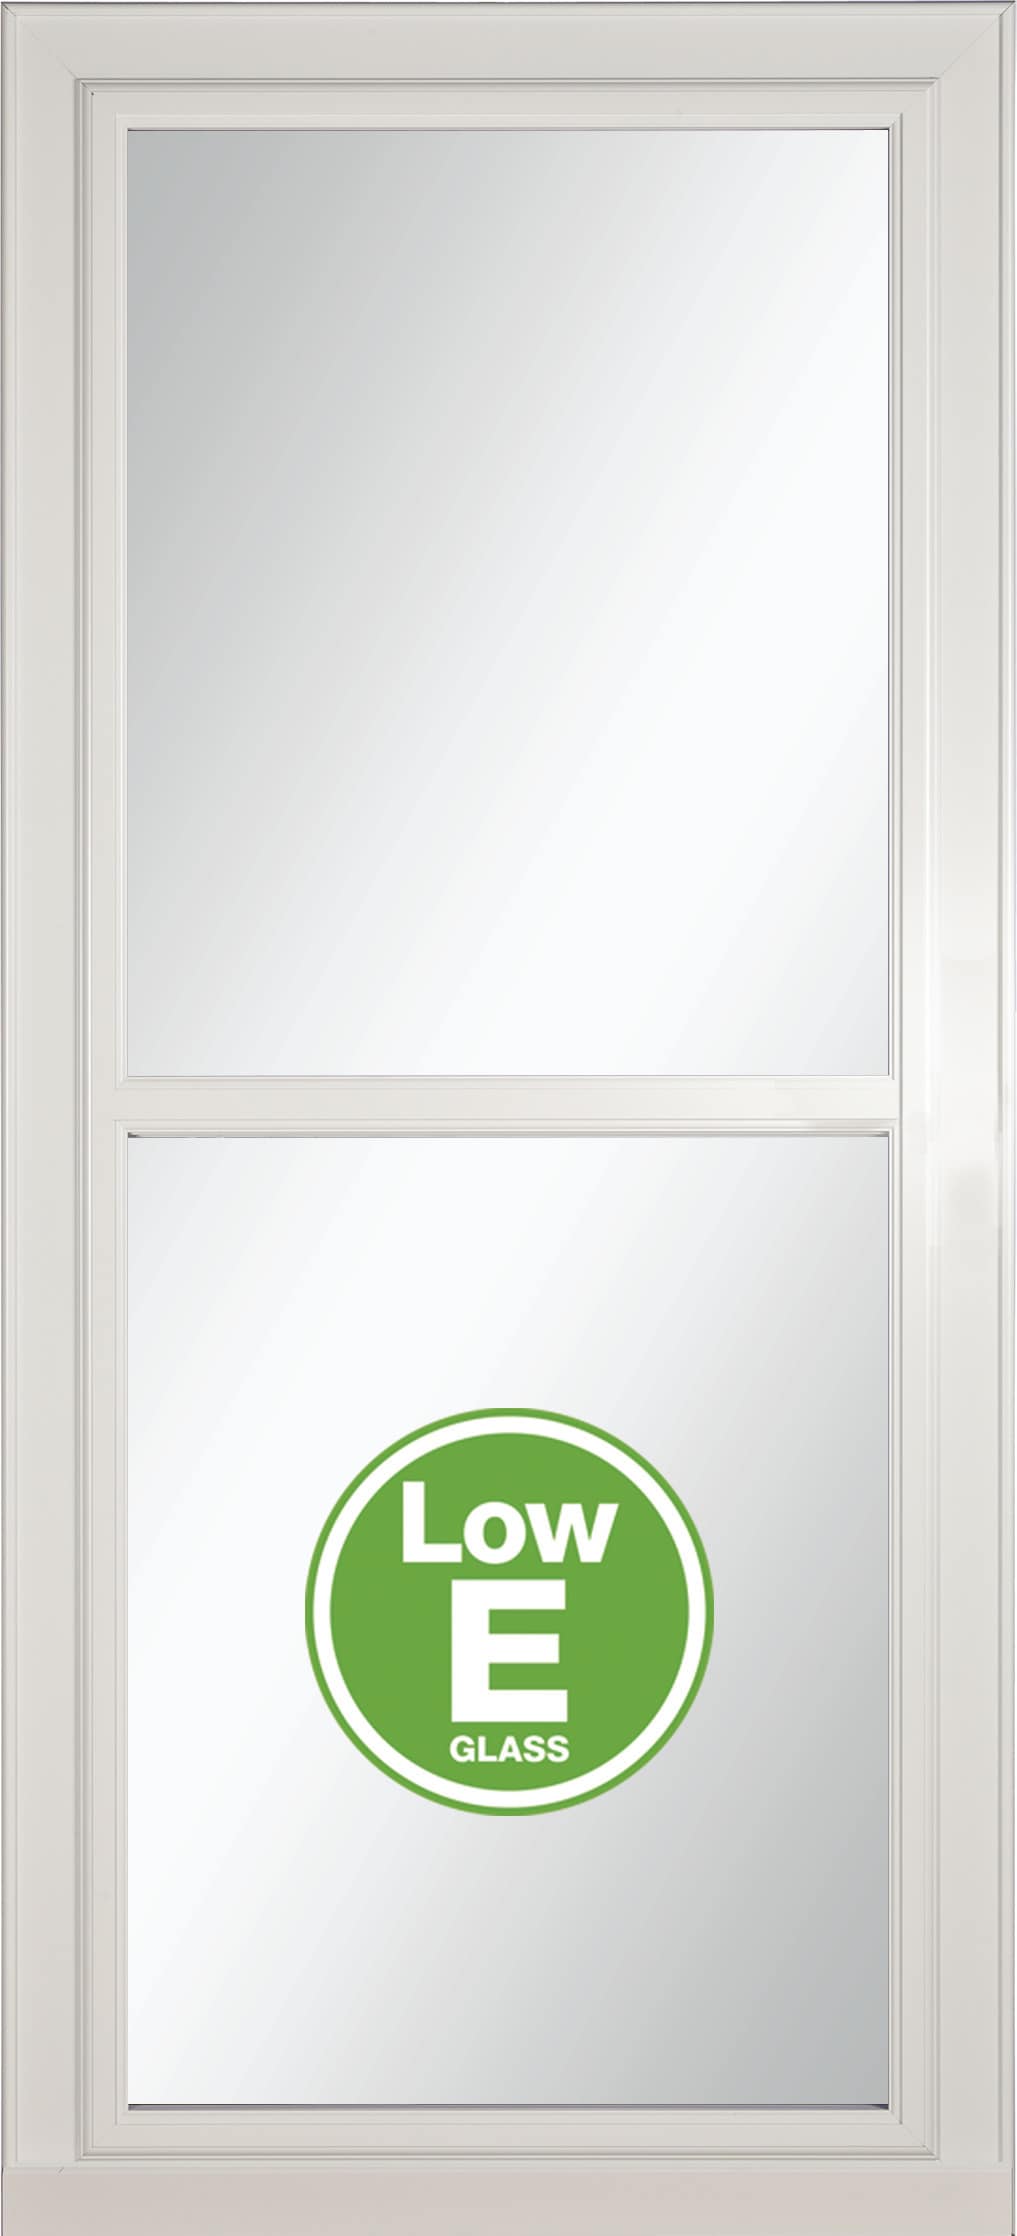 Tradewinds Selection Low-E 36-in x 96-in White Full-view Retractable Screen Aluminum Storm Door | - LARSON 14604039E